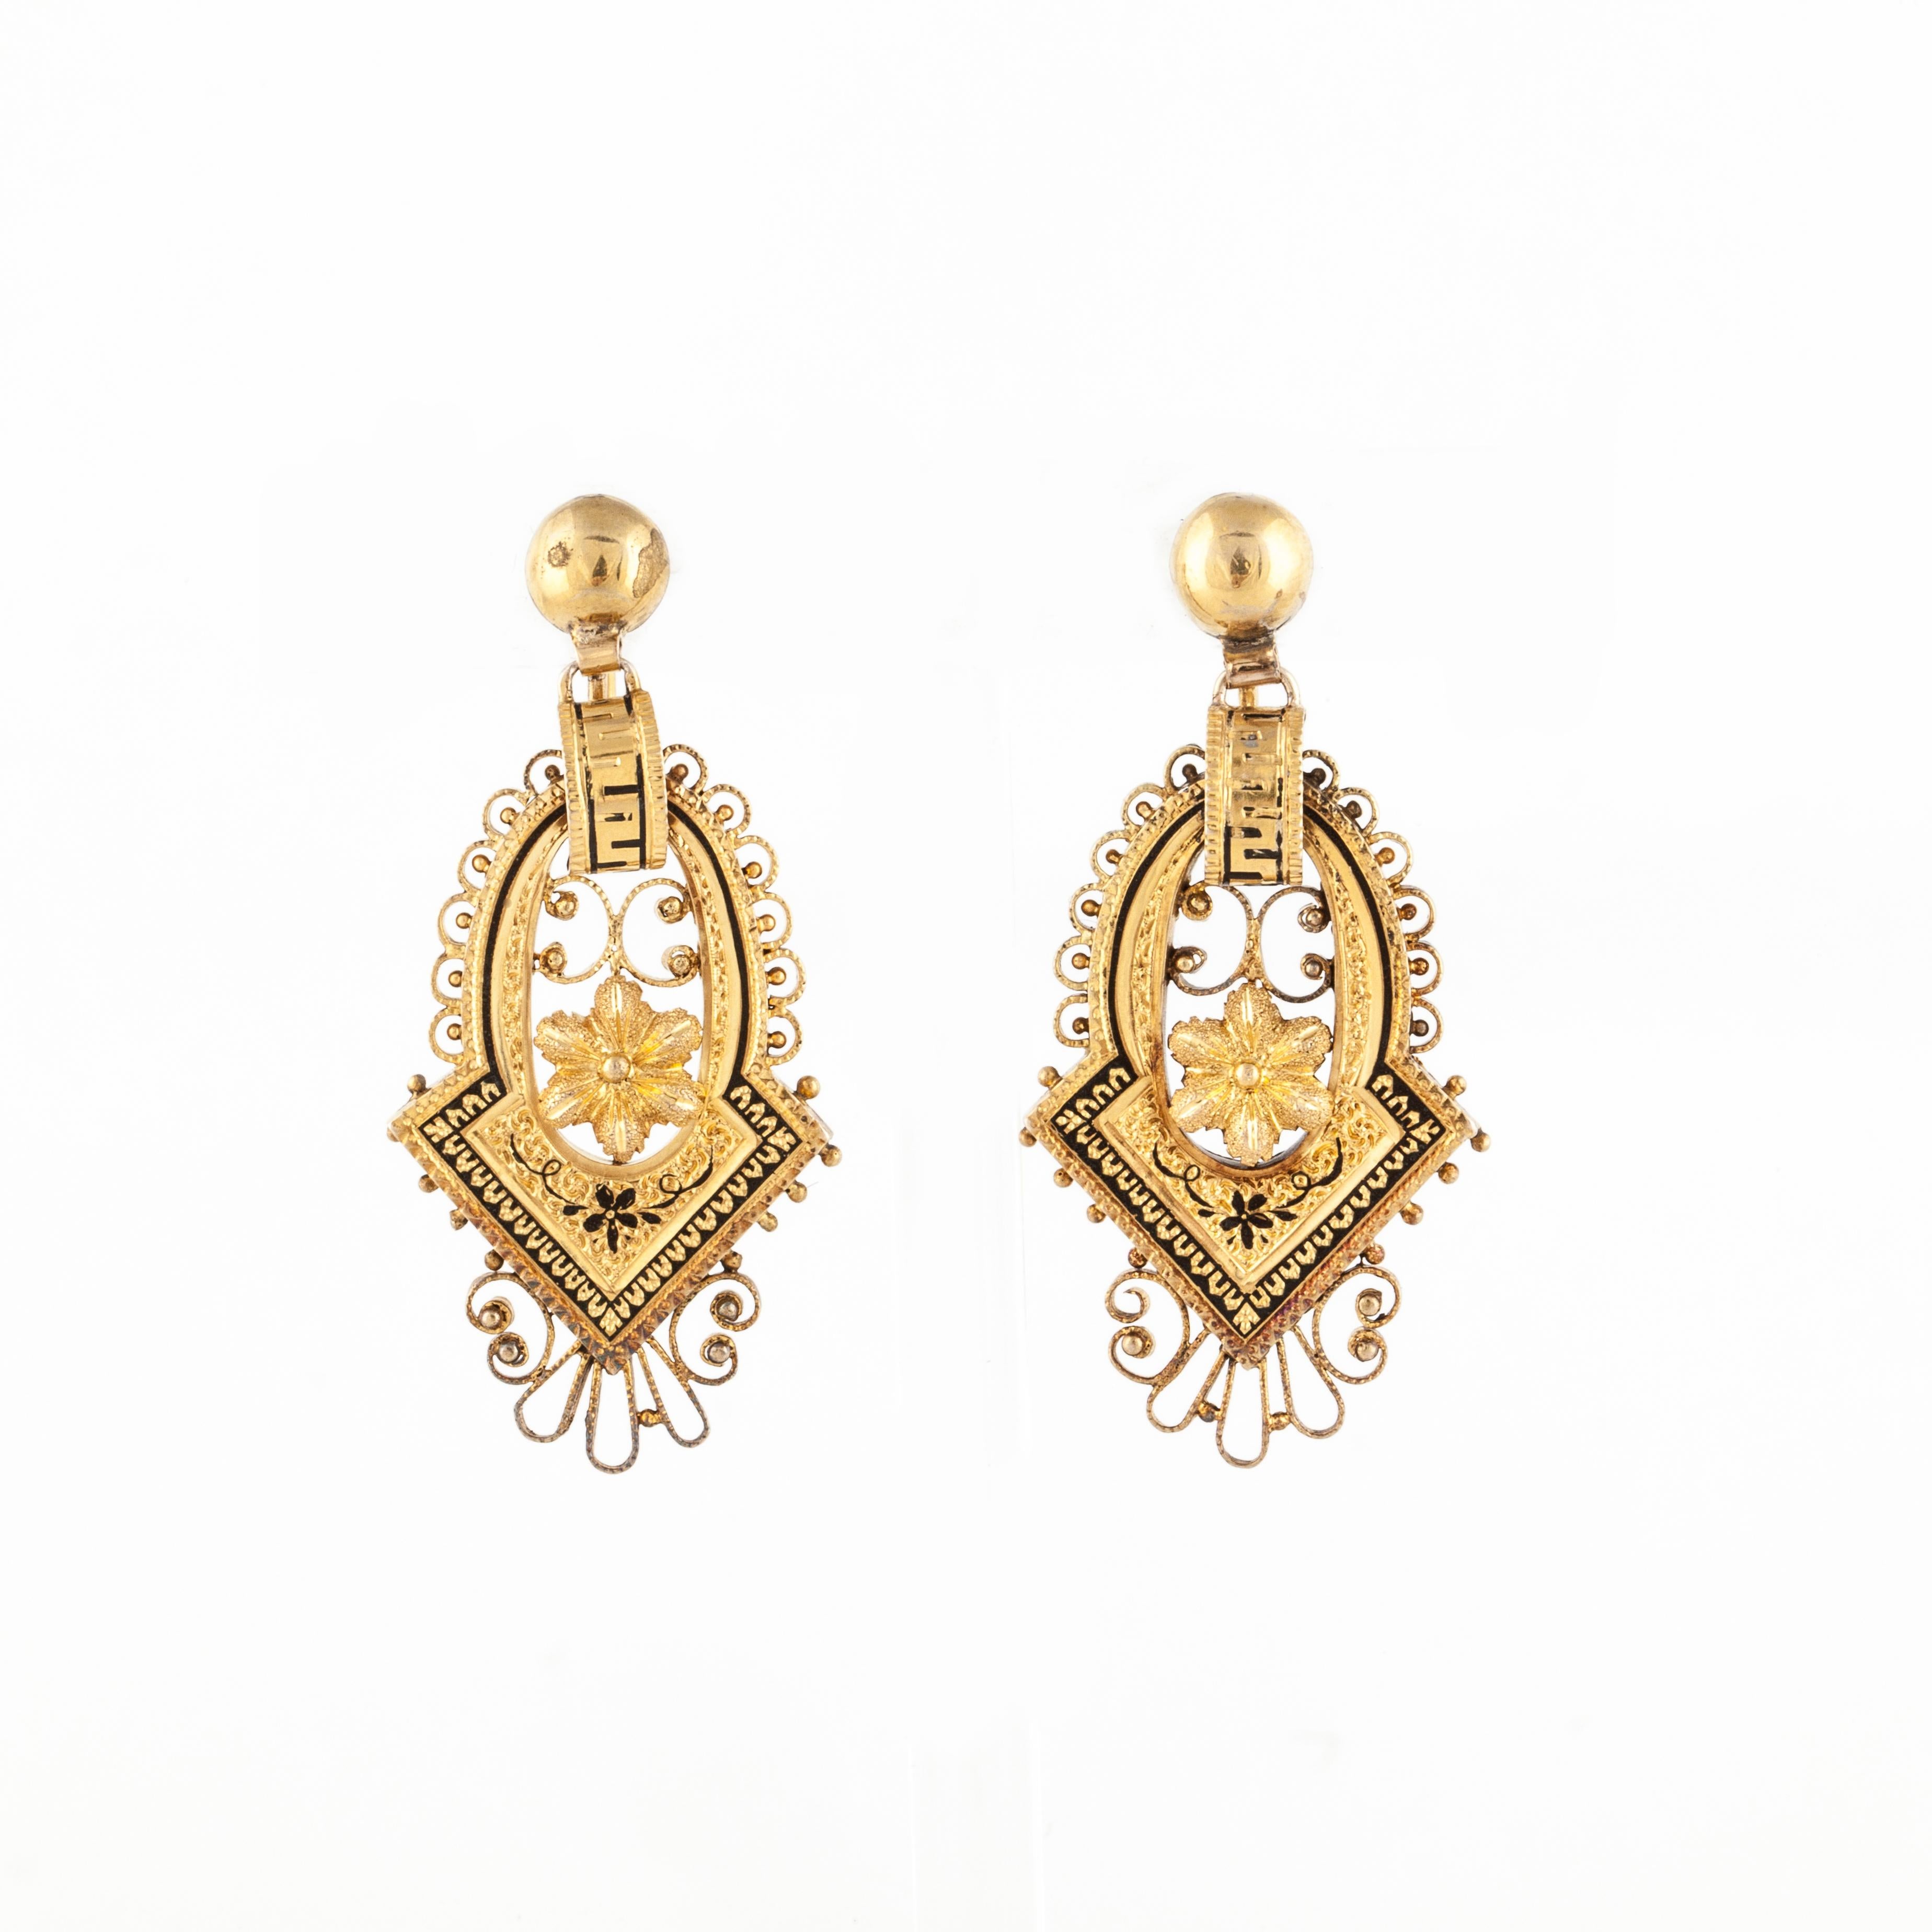 Victorian earrings crafted in 14K yellow gold with black enameling.  They measure 1 7/8 inches long by 7/8 inches wide.  They are screw backs.  Please note, there is very minor enamel loss.